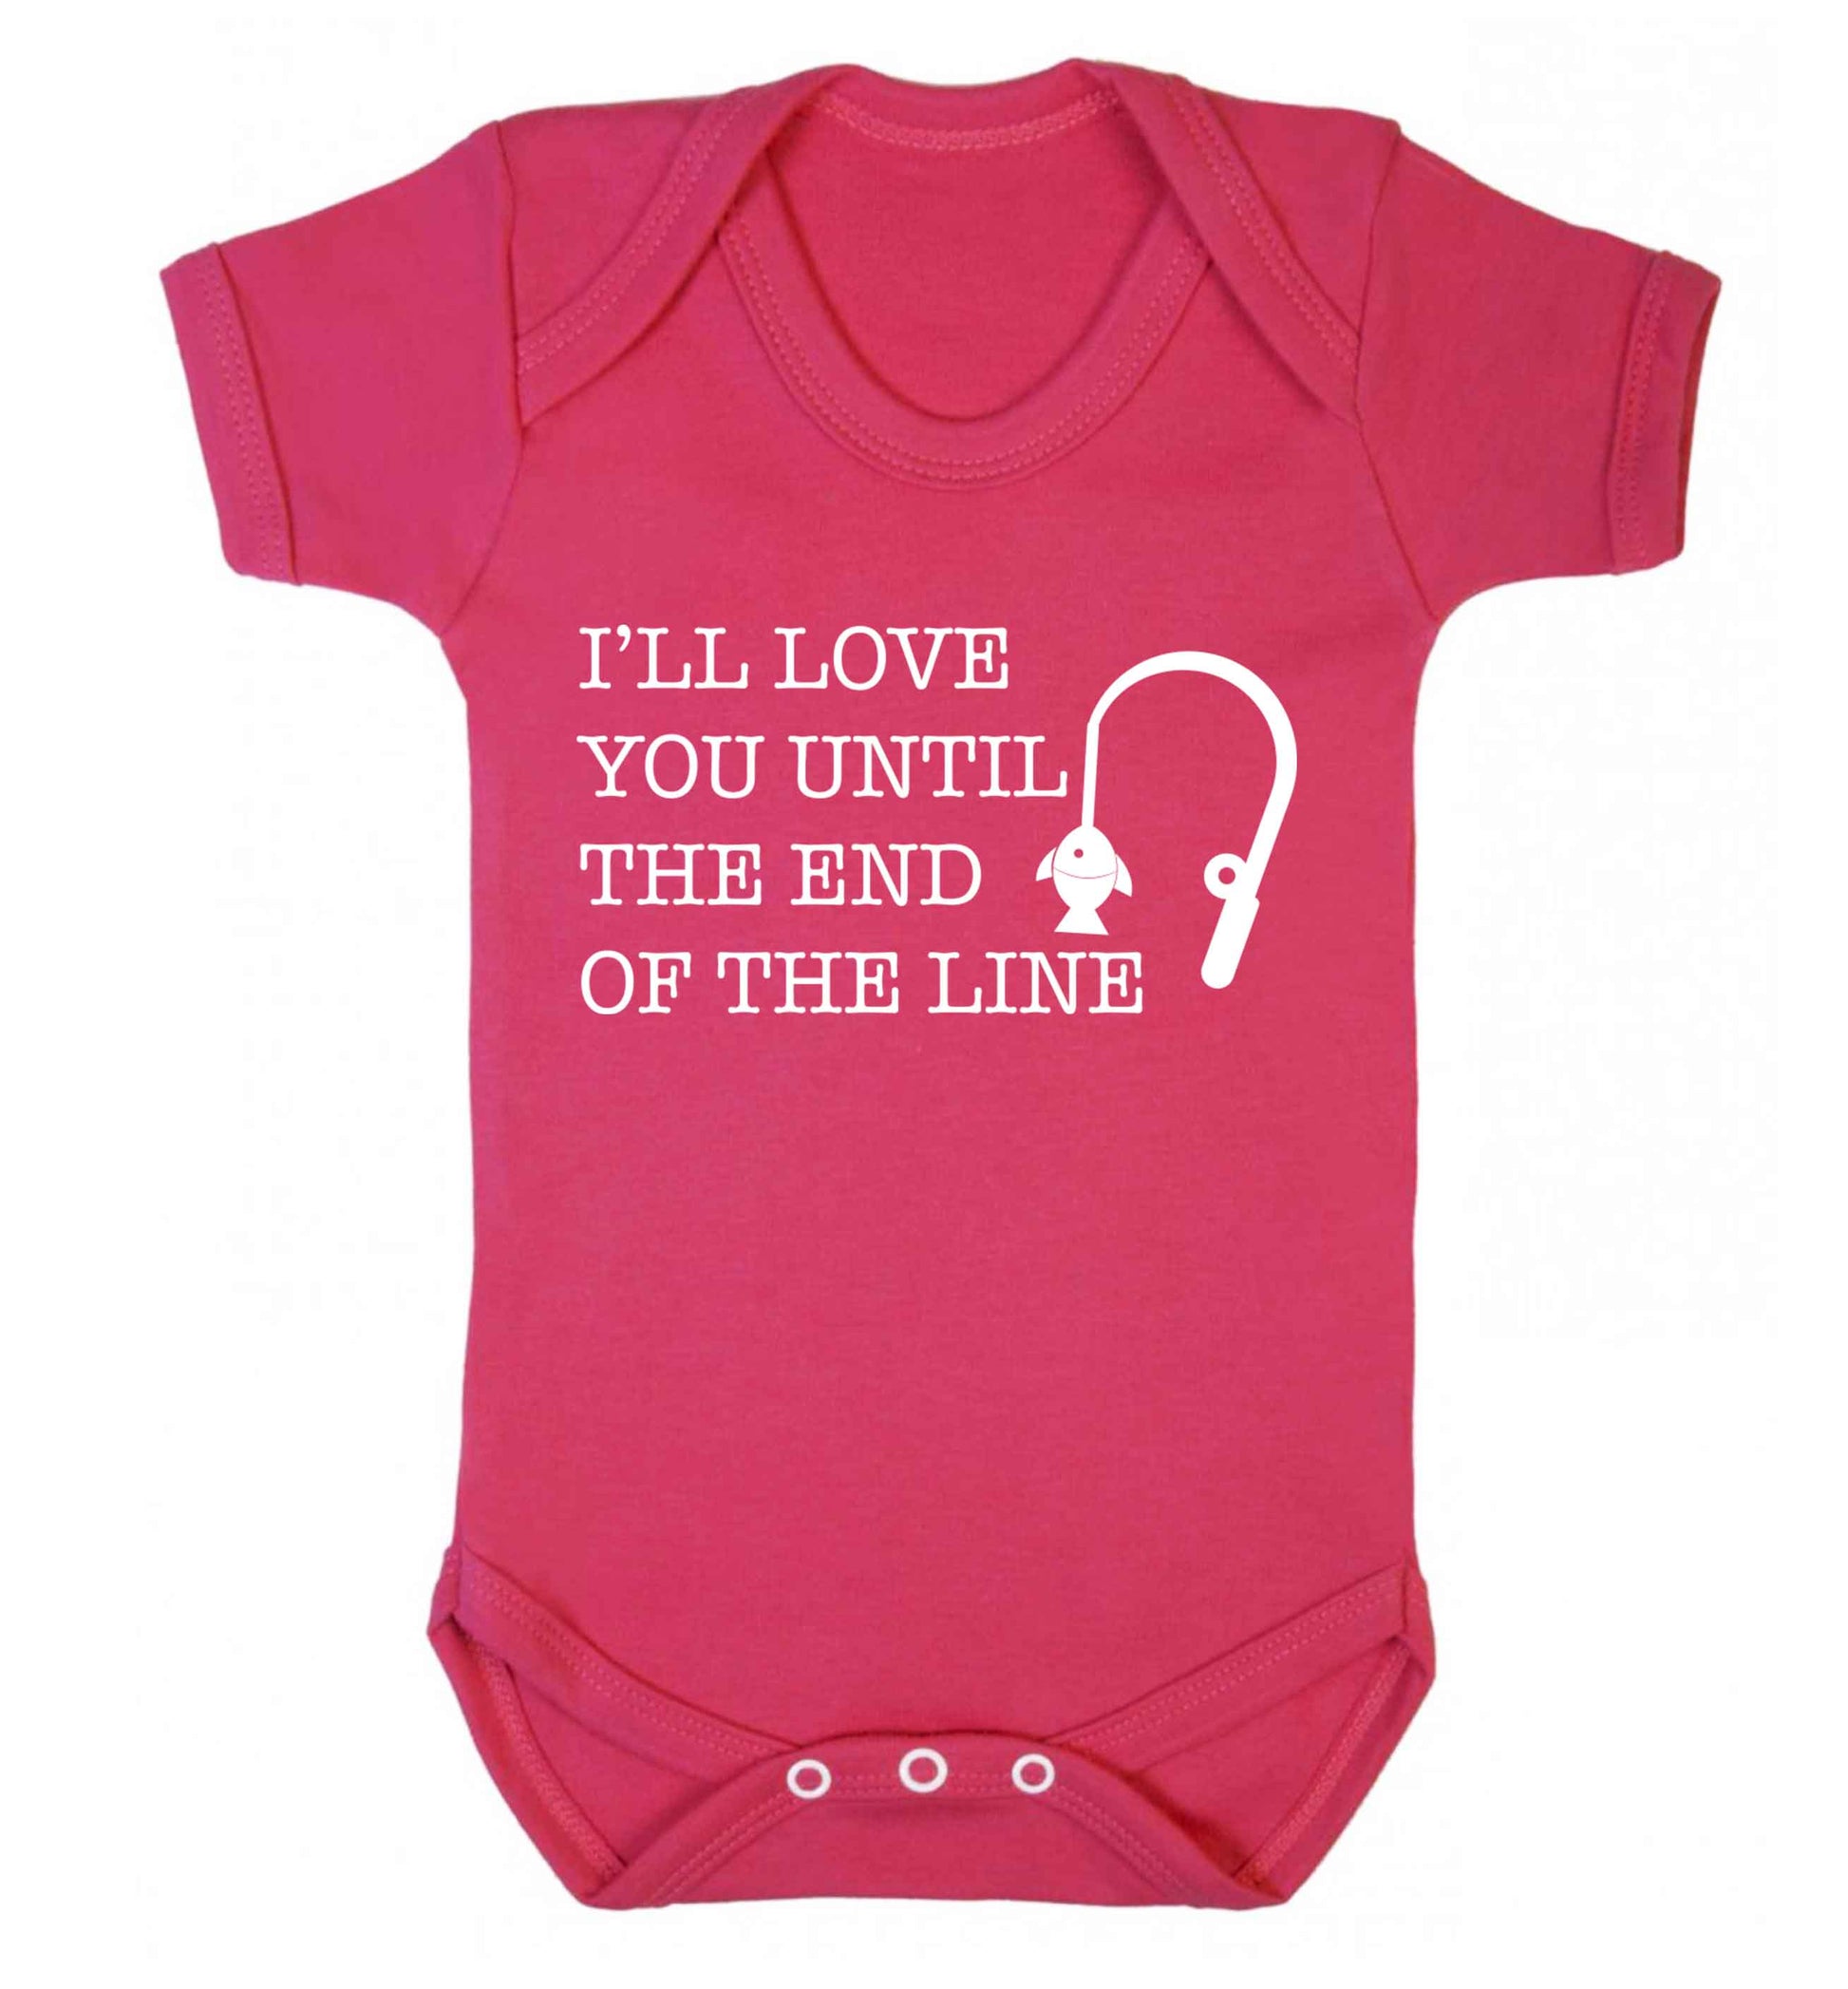 I'll love you until the end of the line Baby Vest dark pink 18-24 months